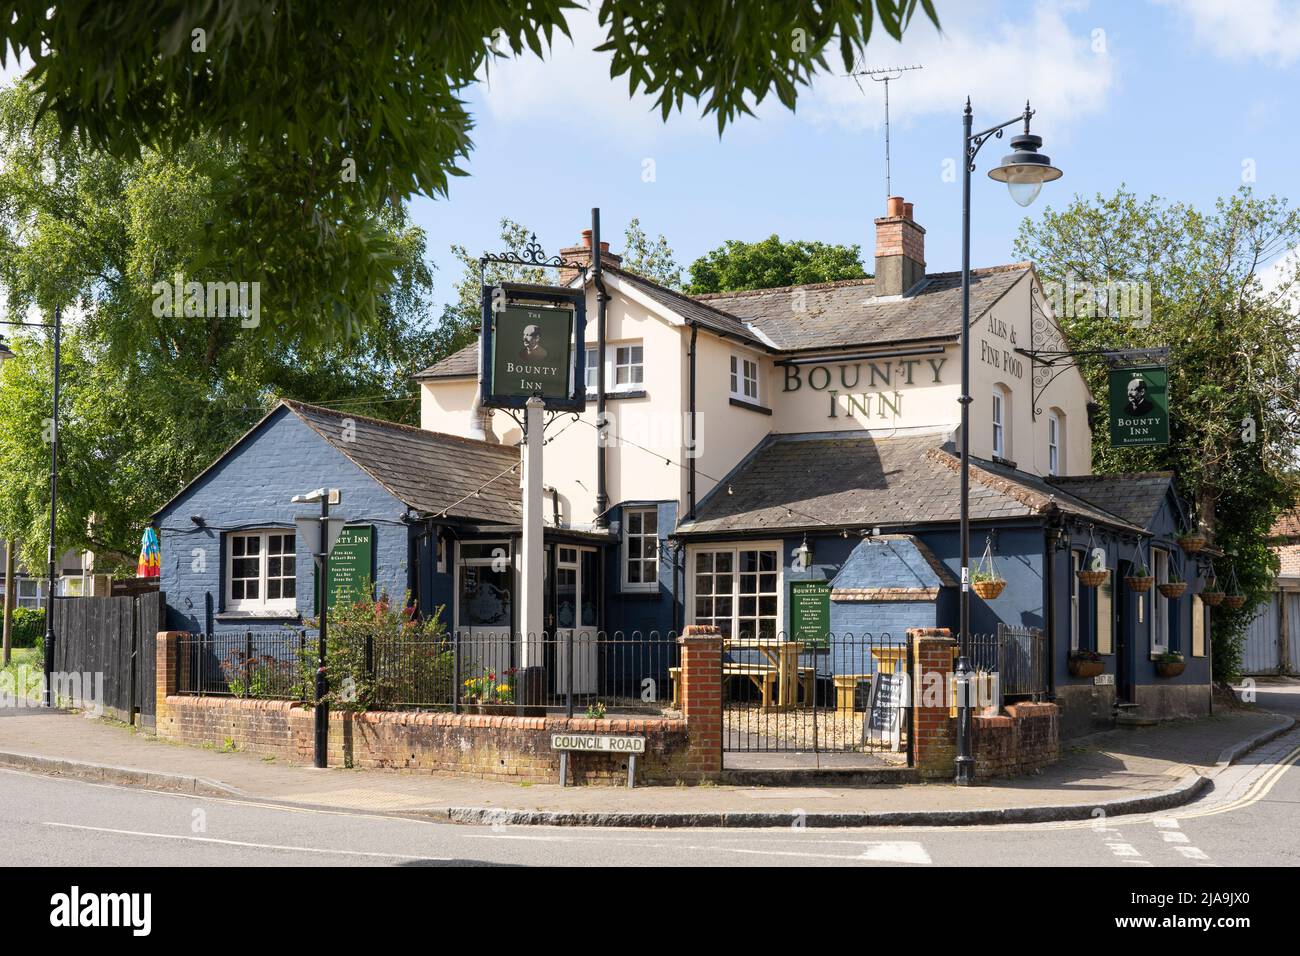 The historic mid 18th century Bounty Inn is a popular pub in Basingstoke town centre. Hampshire, England. Theme - pub and hospitality industry Stock Photo